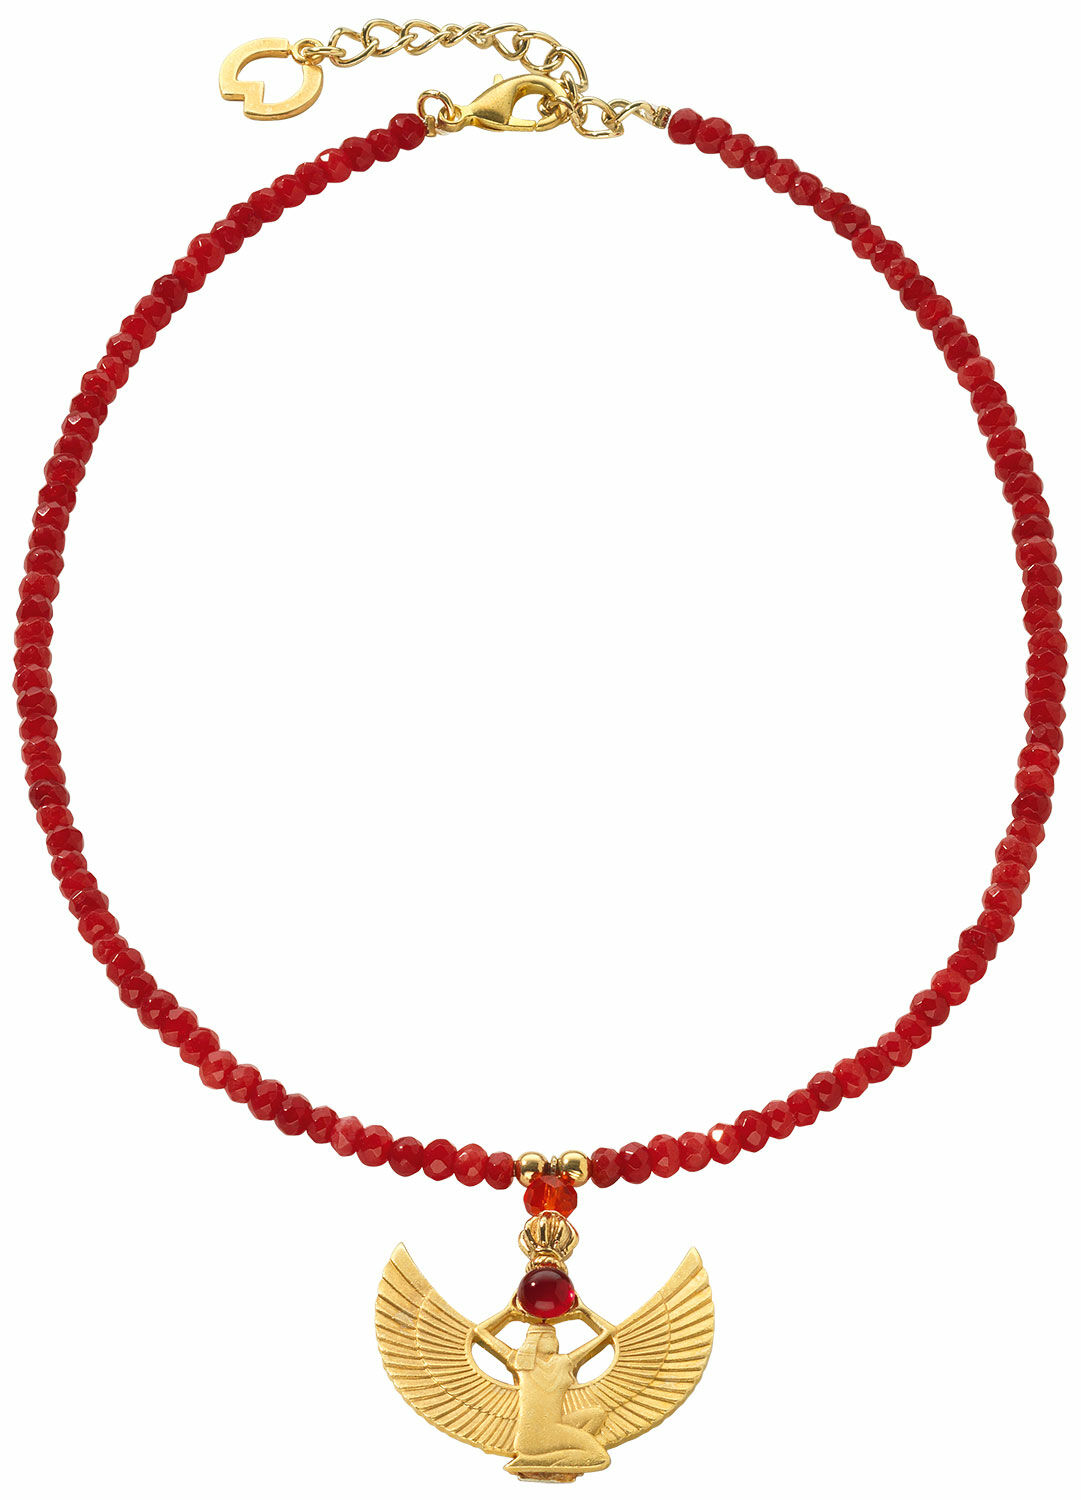 Necklace "Winged Isis" with red agate beads by Petra Waszak